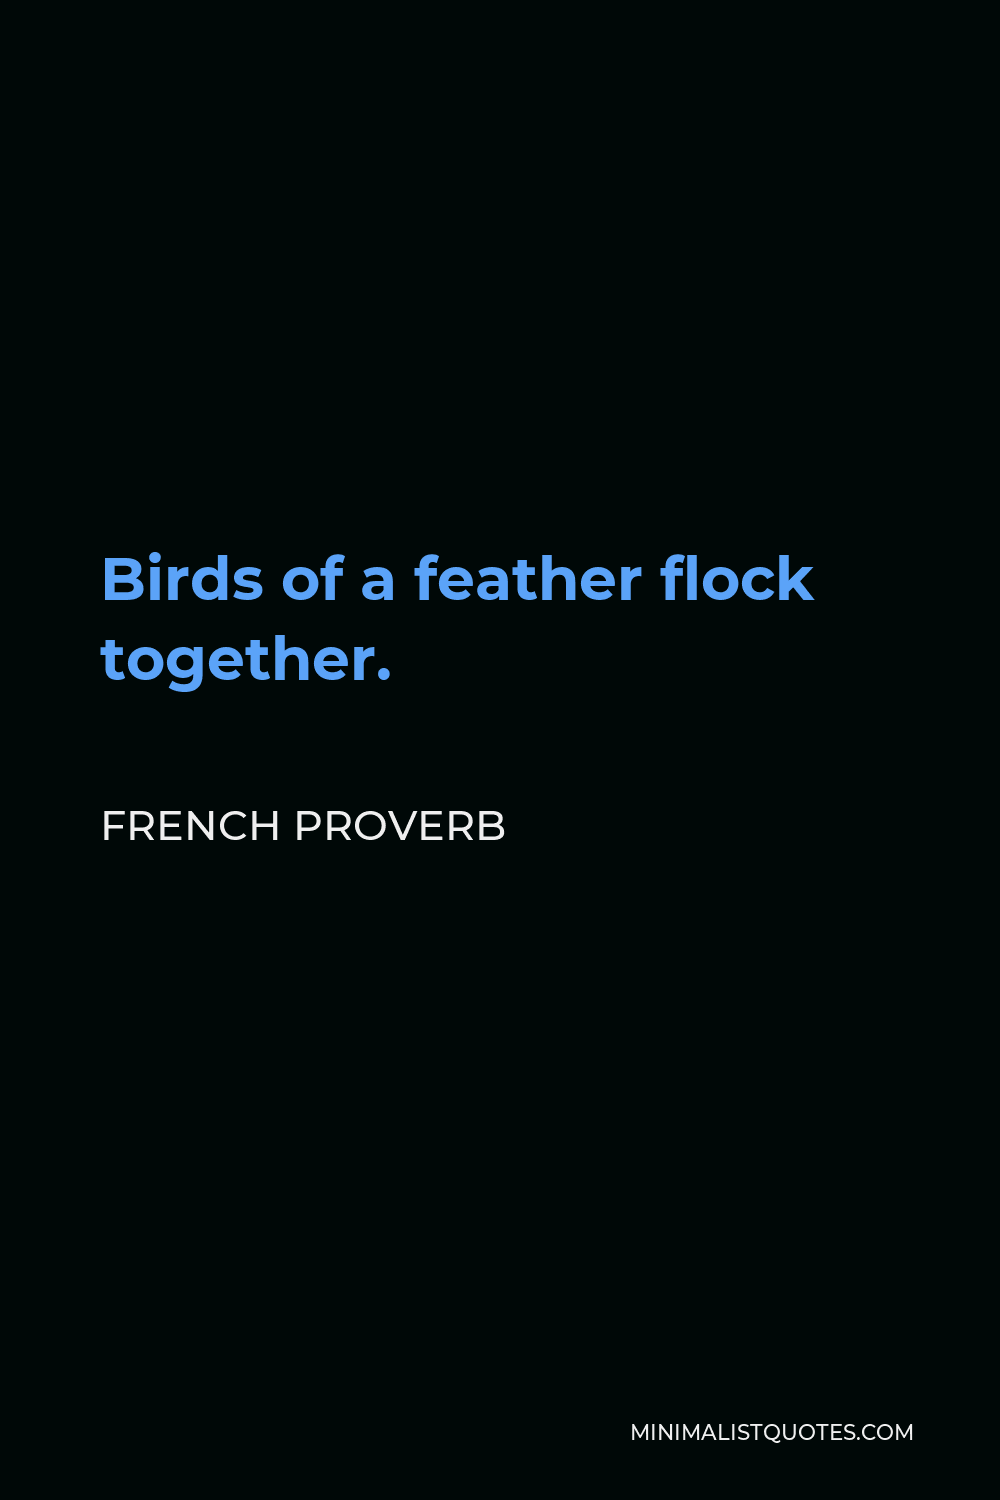 French Proverb Quote - Birds of a feather flock together.